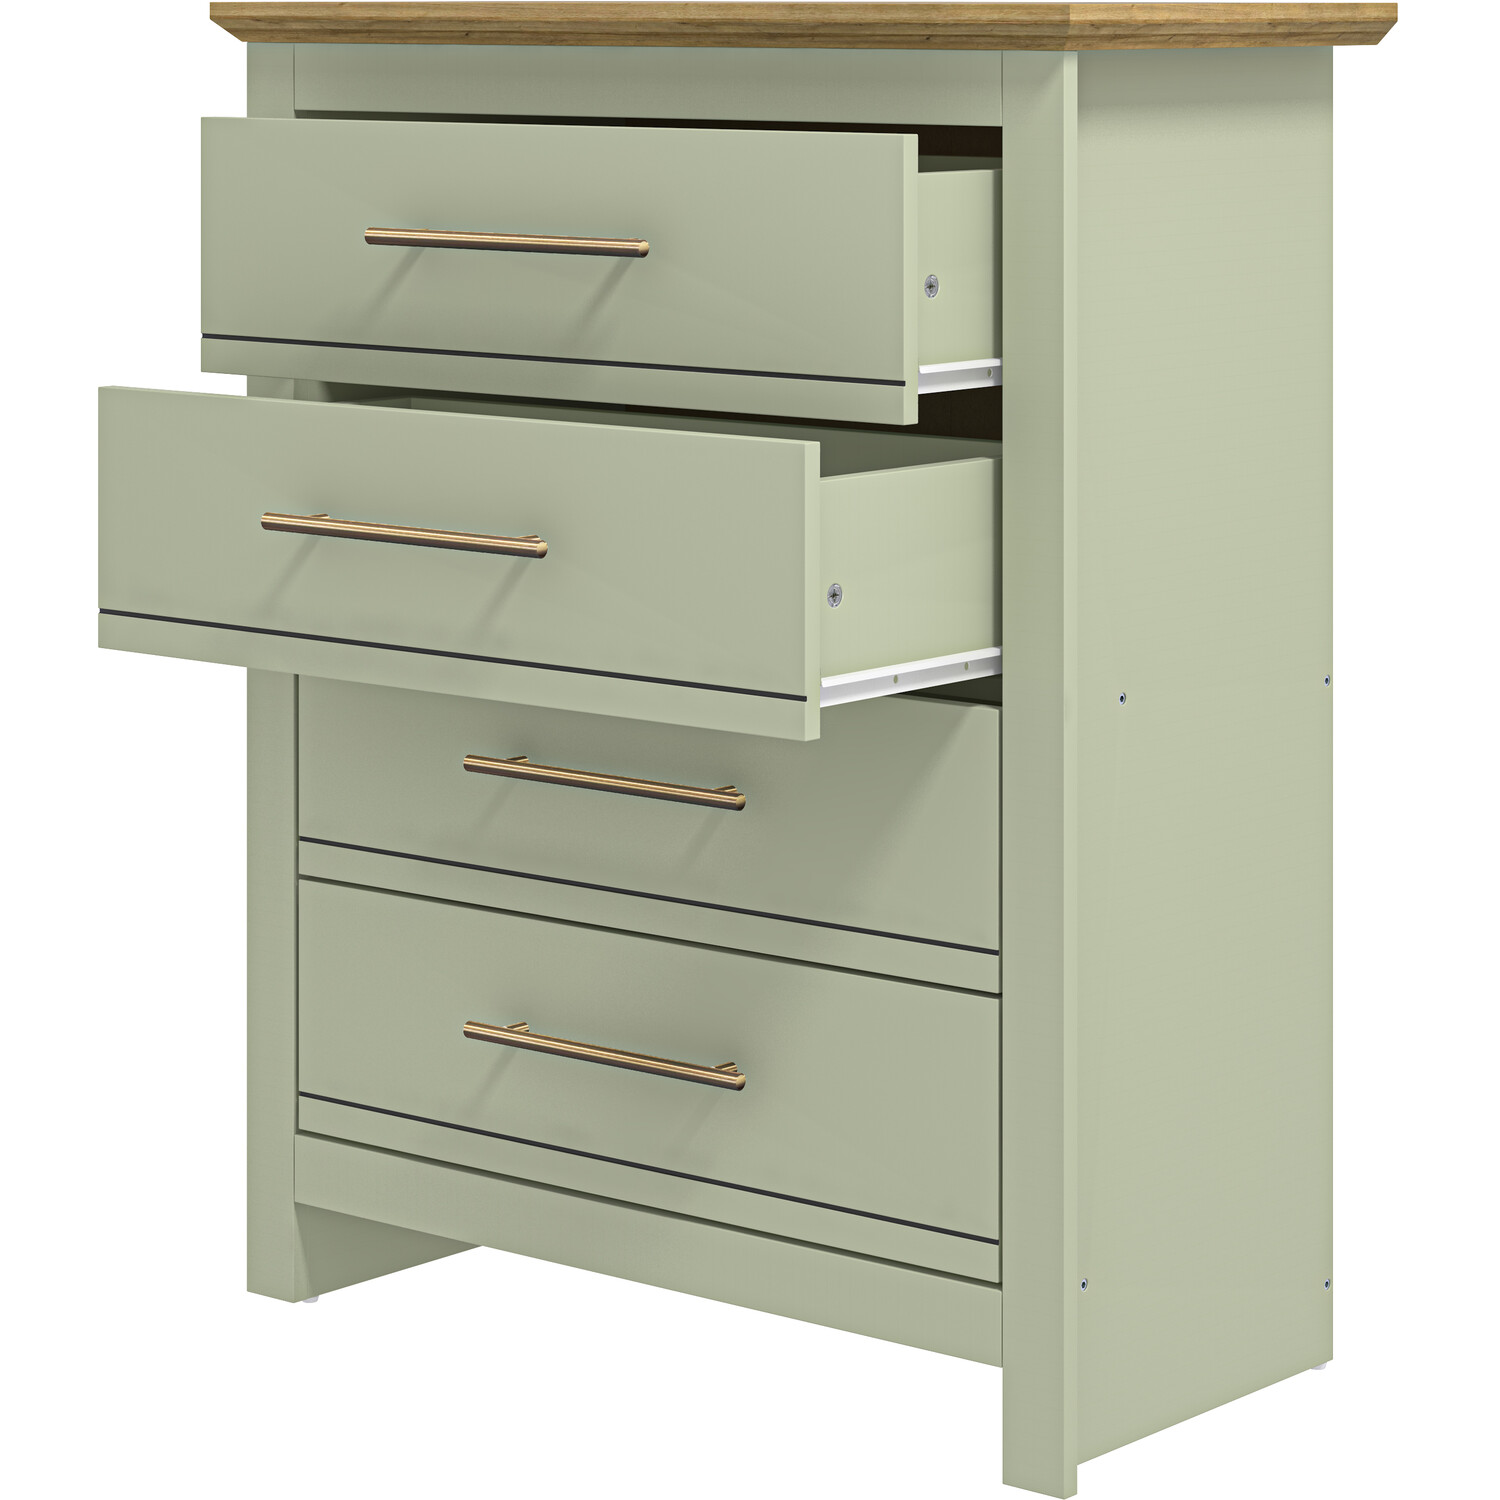 Bexley 4 Drawer Sage Green Chest of Drawers Image 4